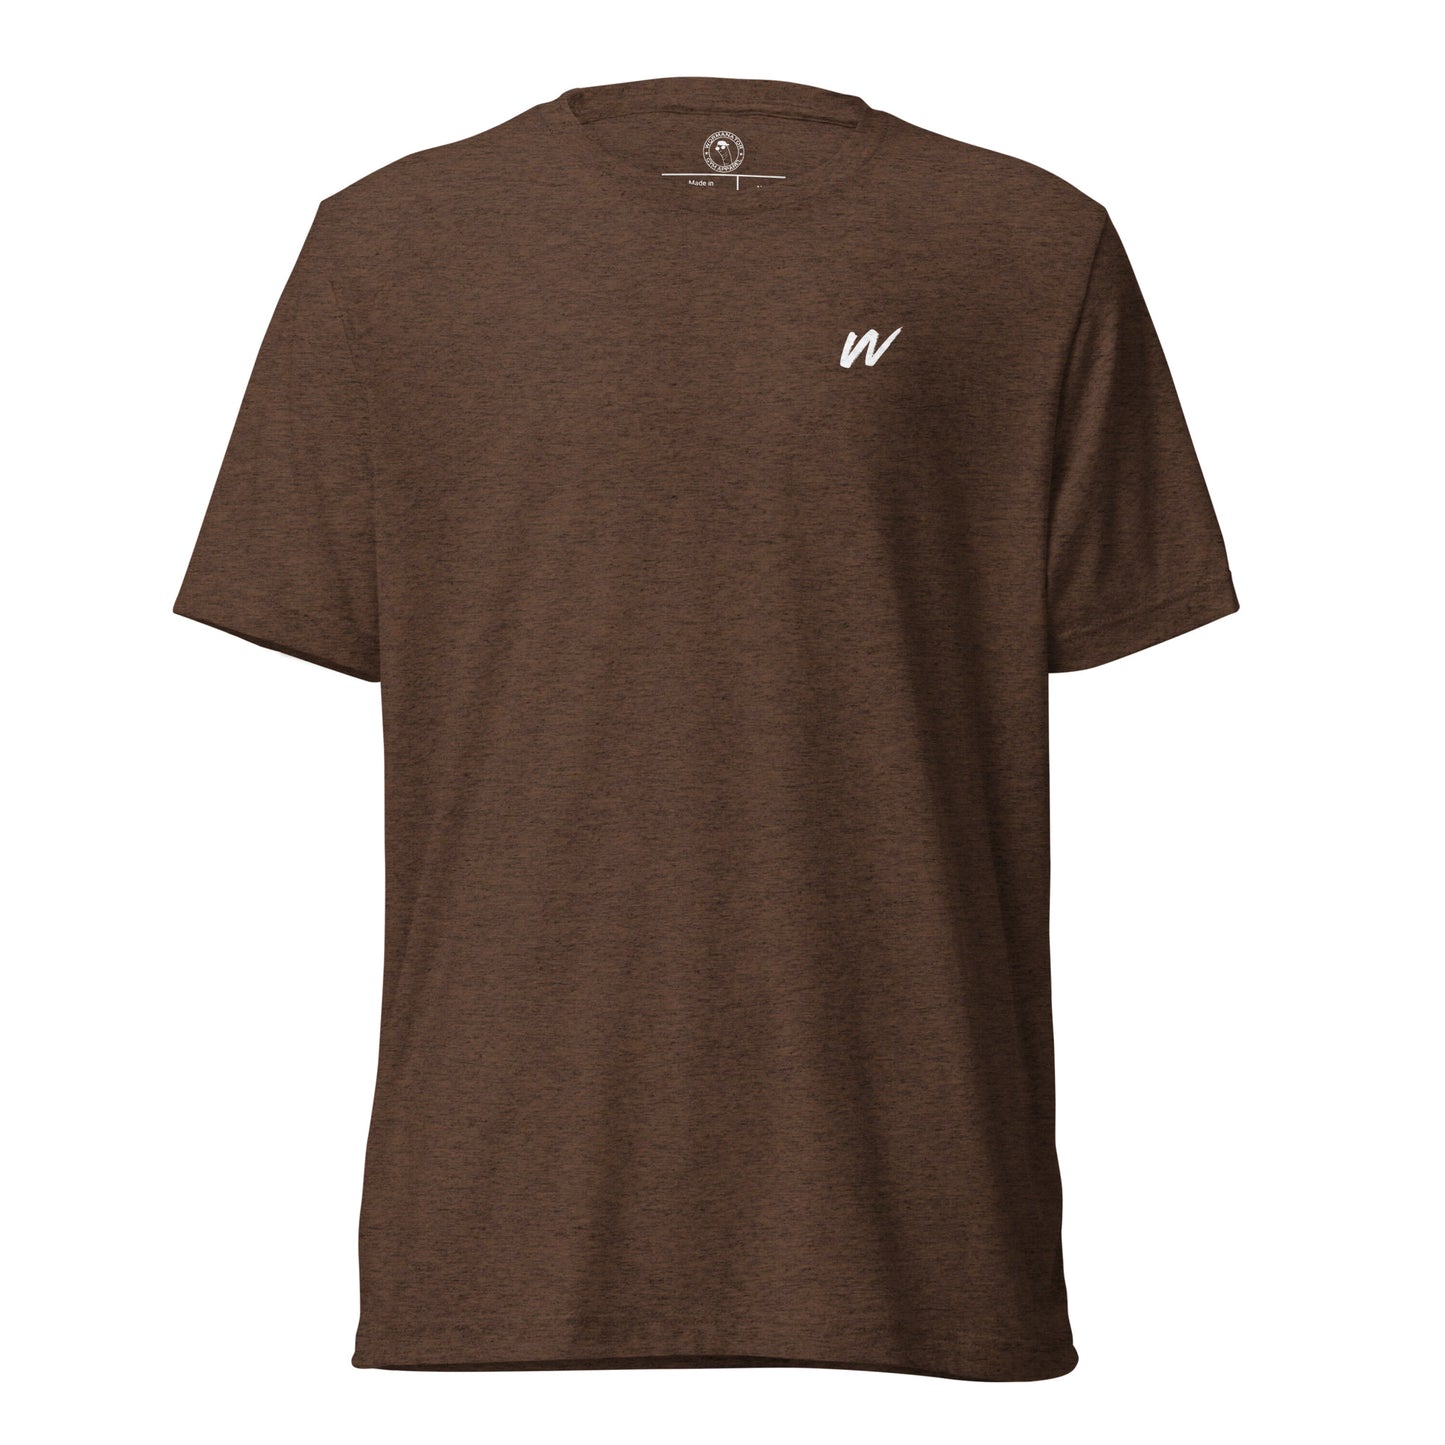 Win the Day T-Shirt in Brown Triblend